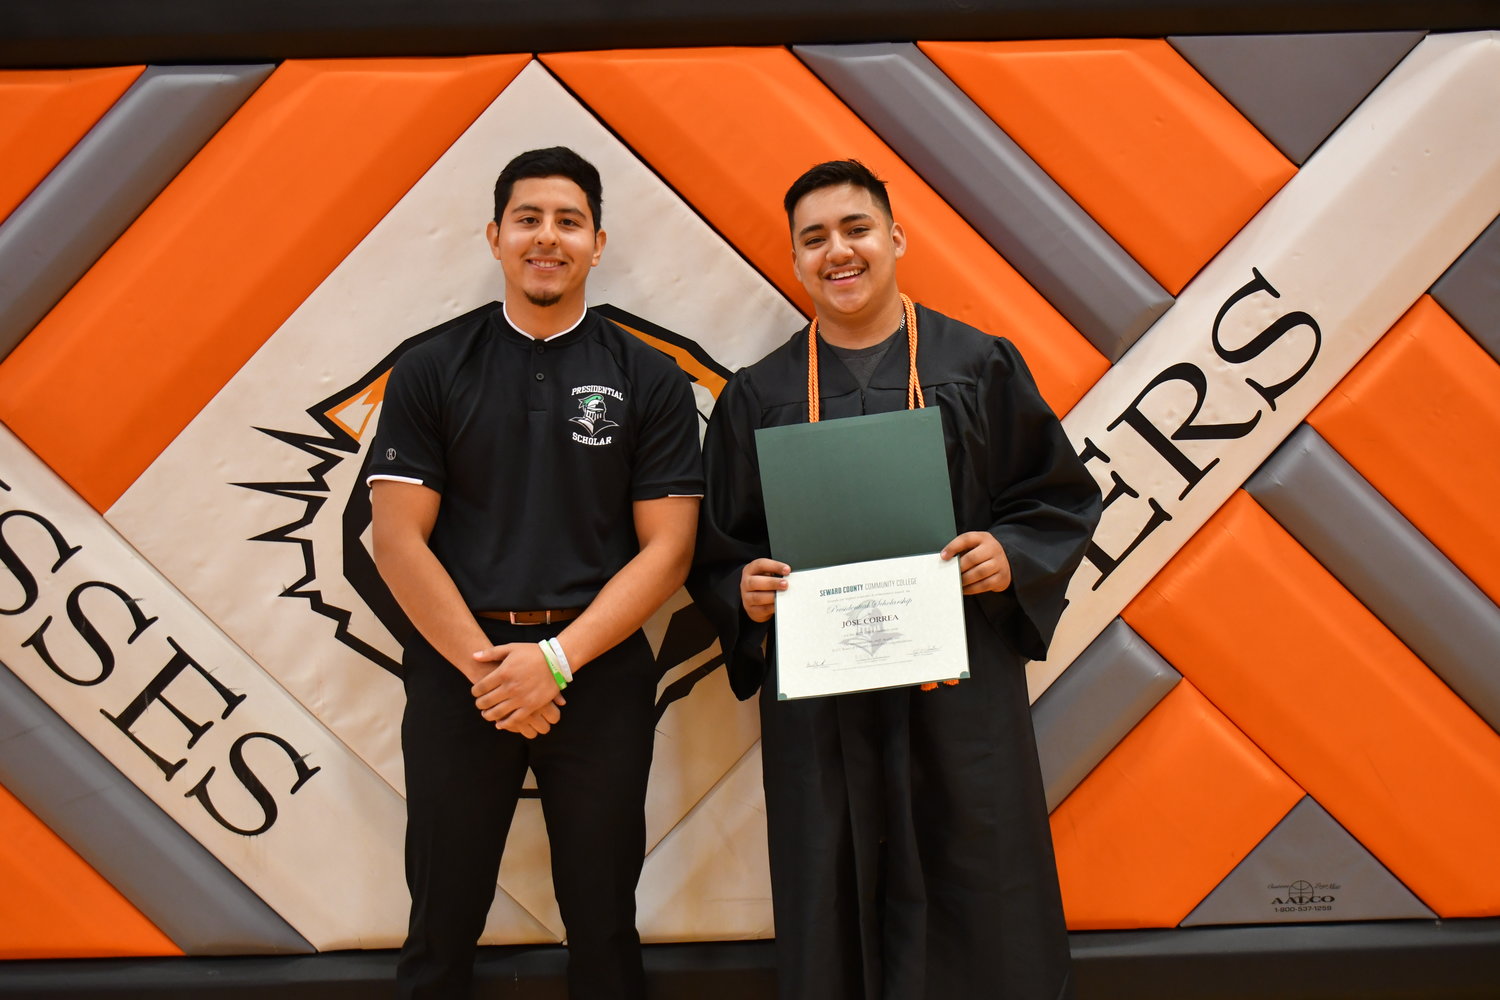 Senior Awards — Jose Correa was given the Seward County Community College Presidential Scholarship from Adrian Torres on Friday, May 13, 2022.